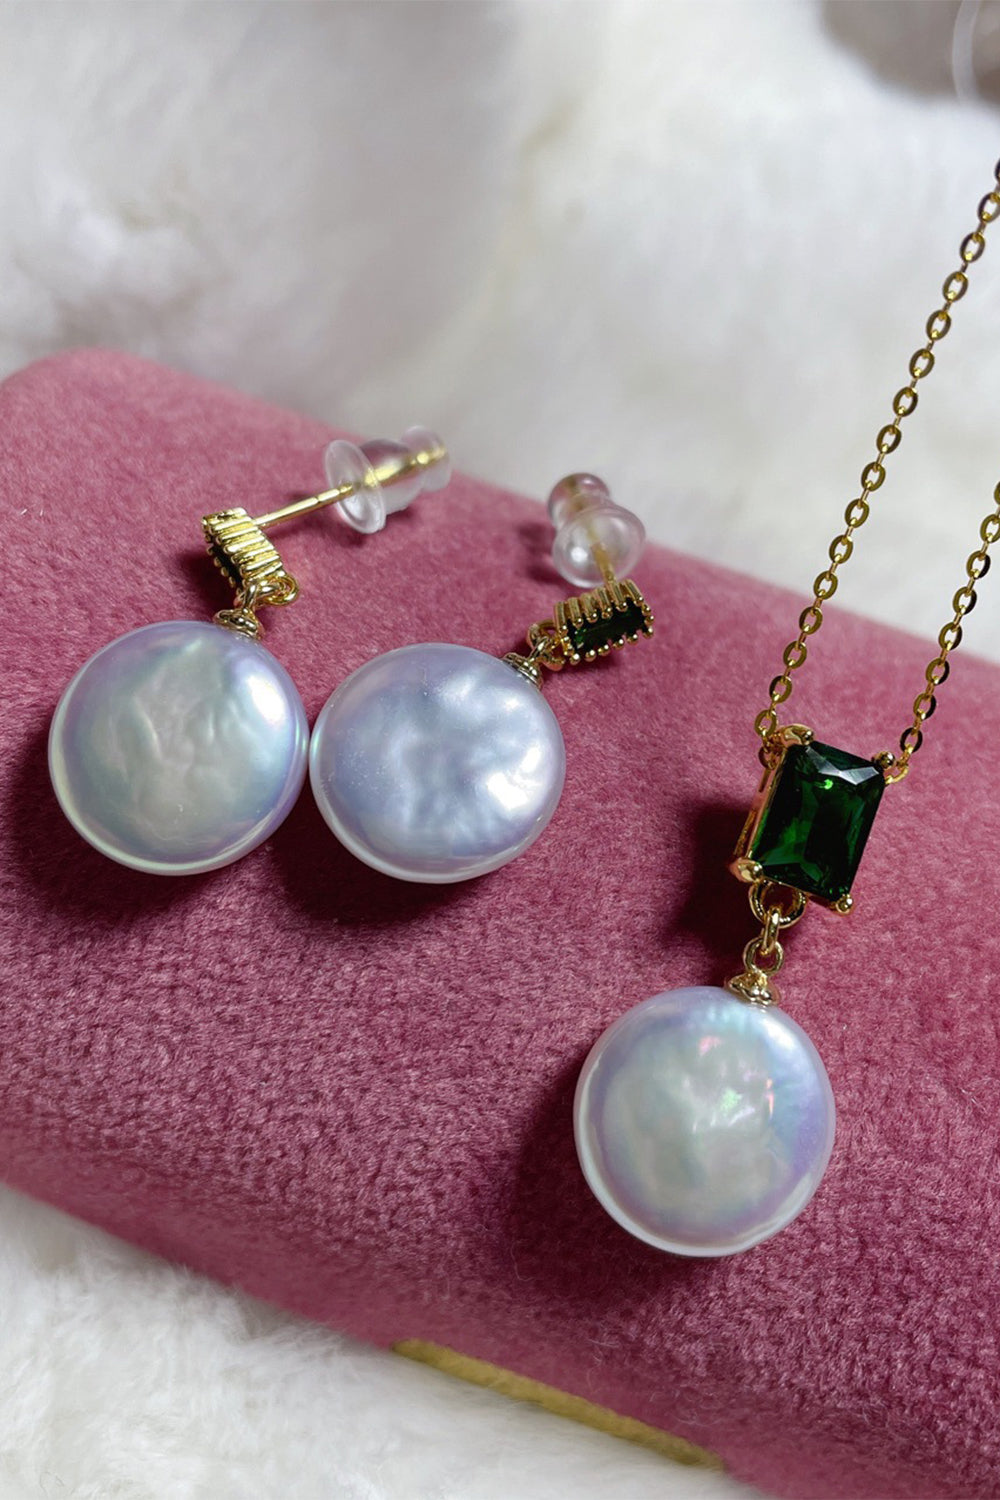 White Pearls Earrings and Necklace